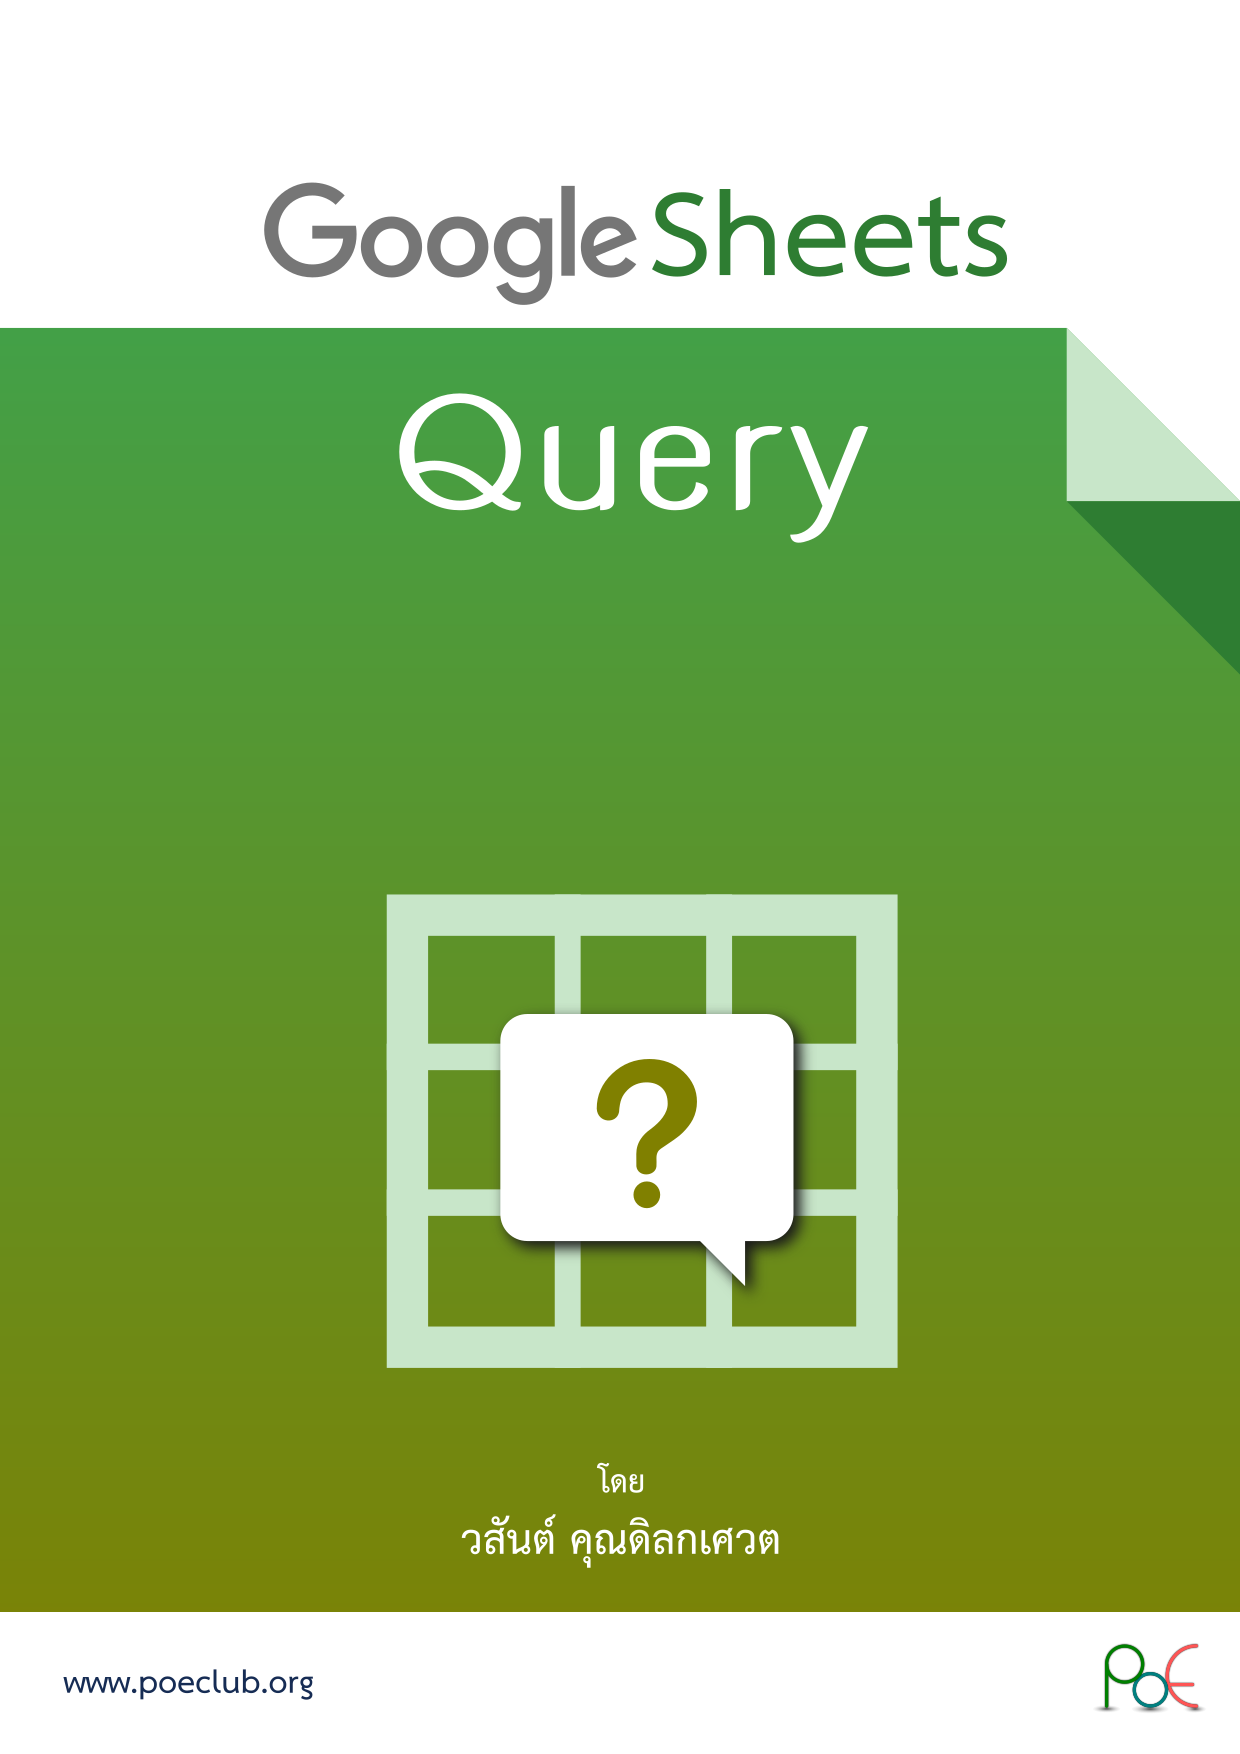 GoogleSheets_QUERY_Cover_1240x1754